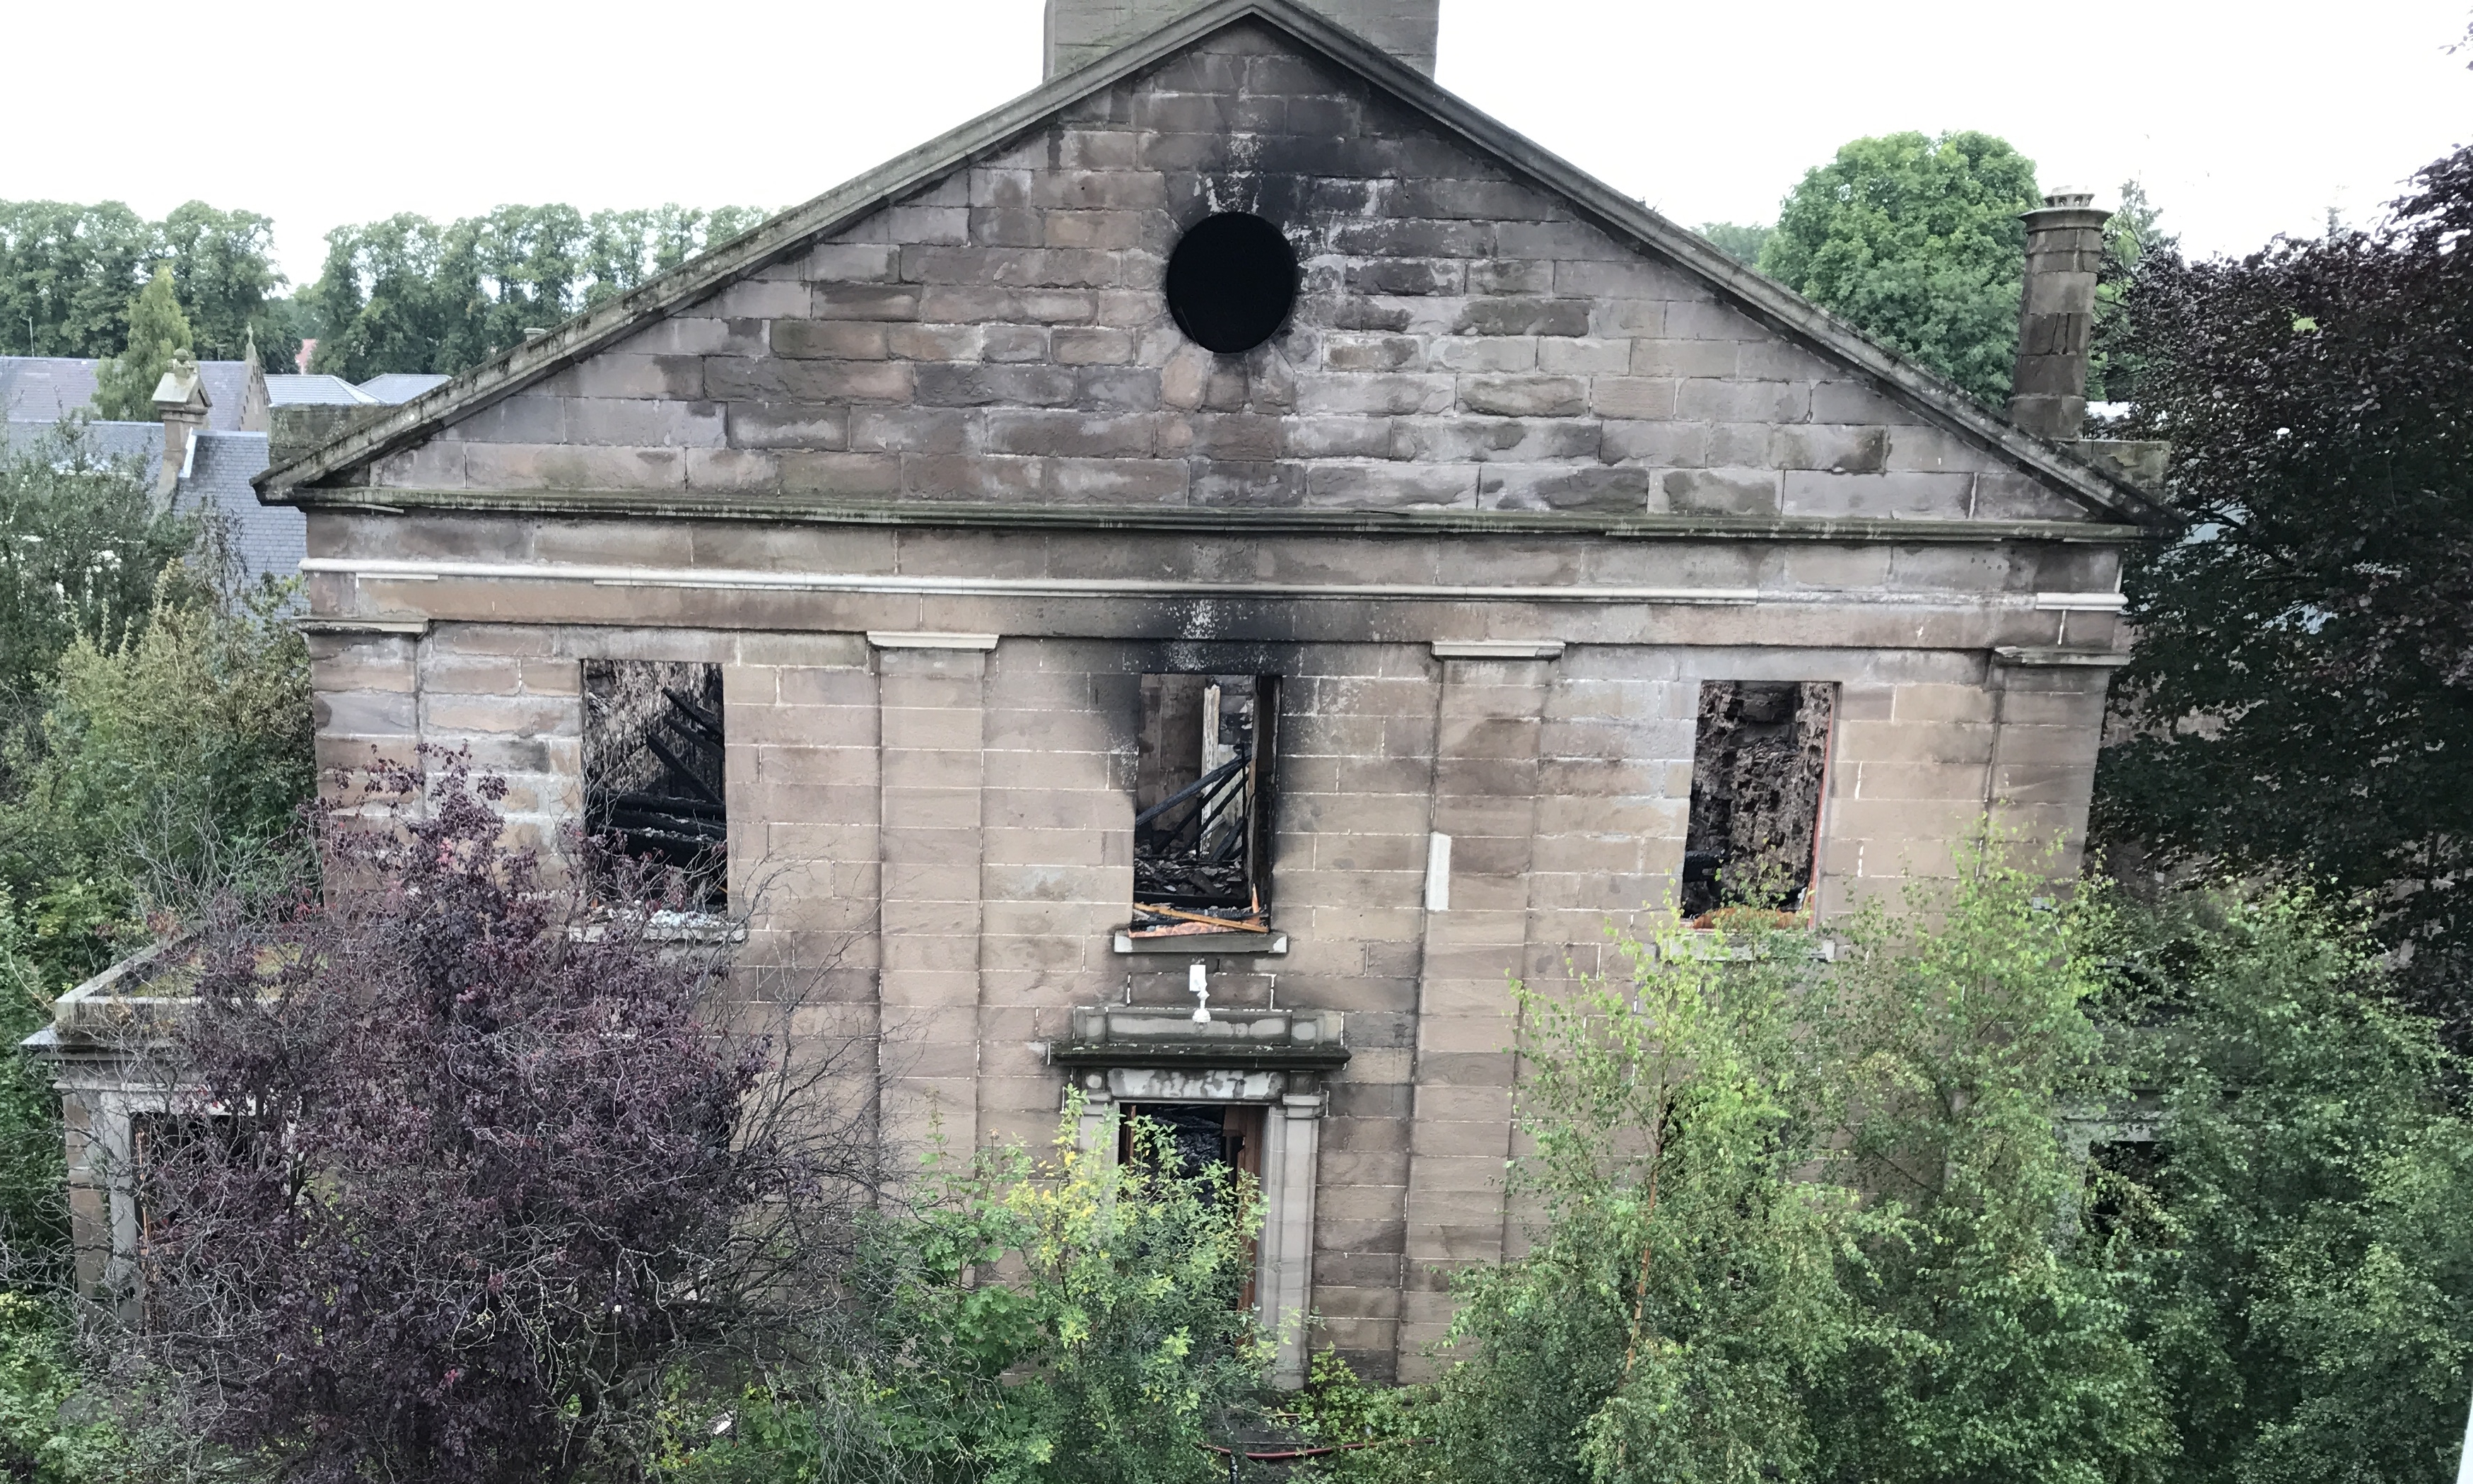 The derelict building suffered major damage in the blaze.